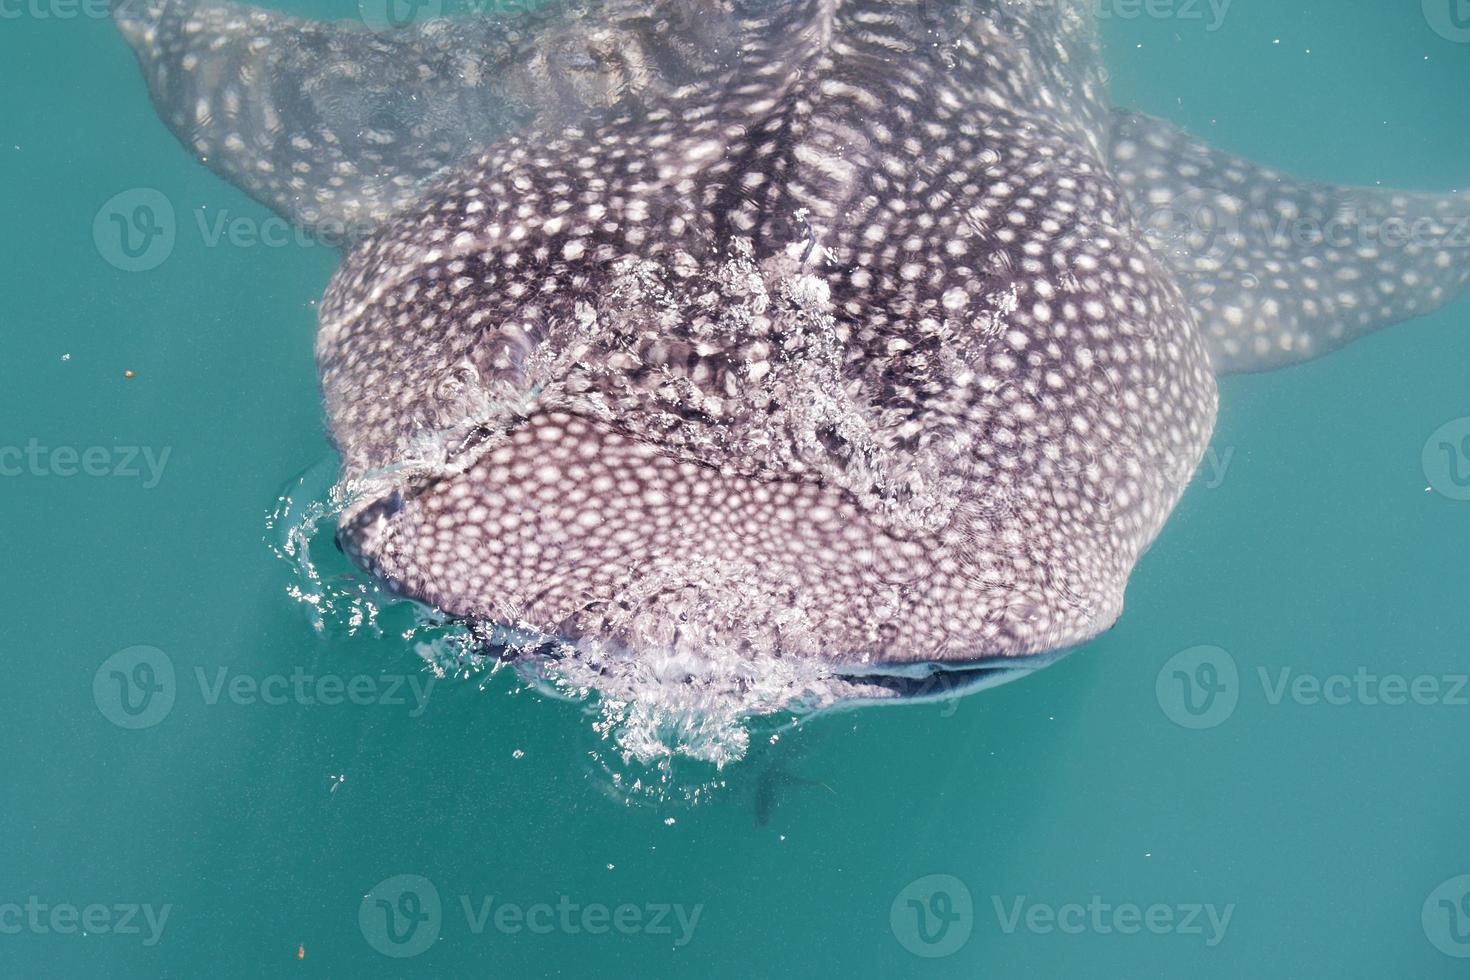 Whale Shark while eating photo